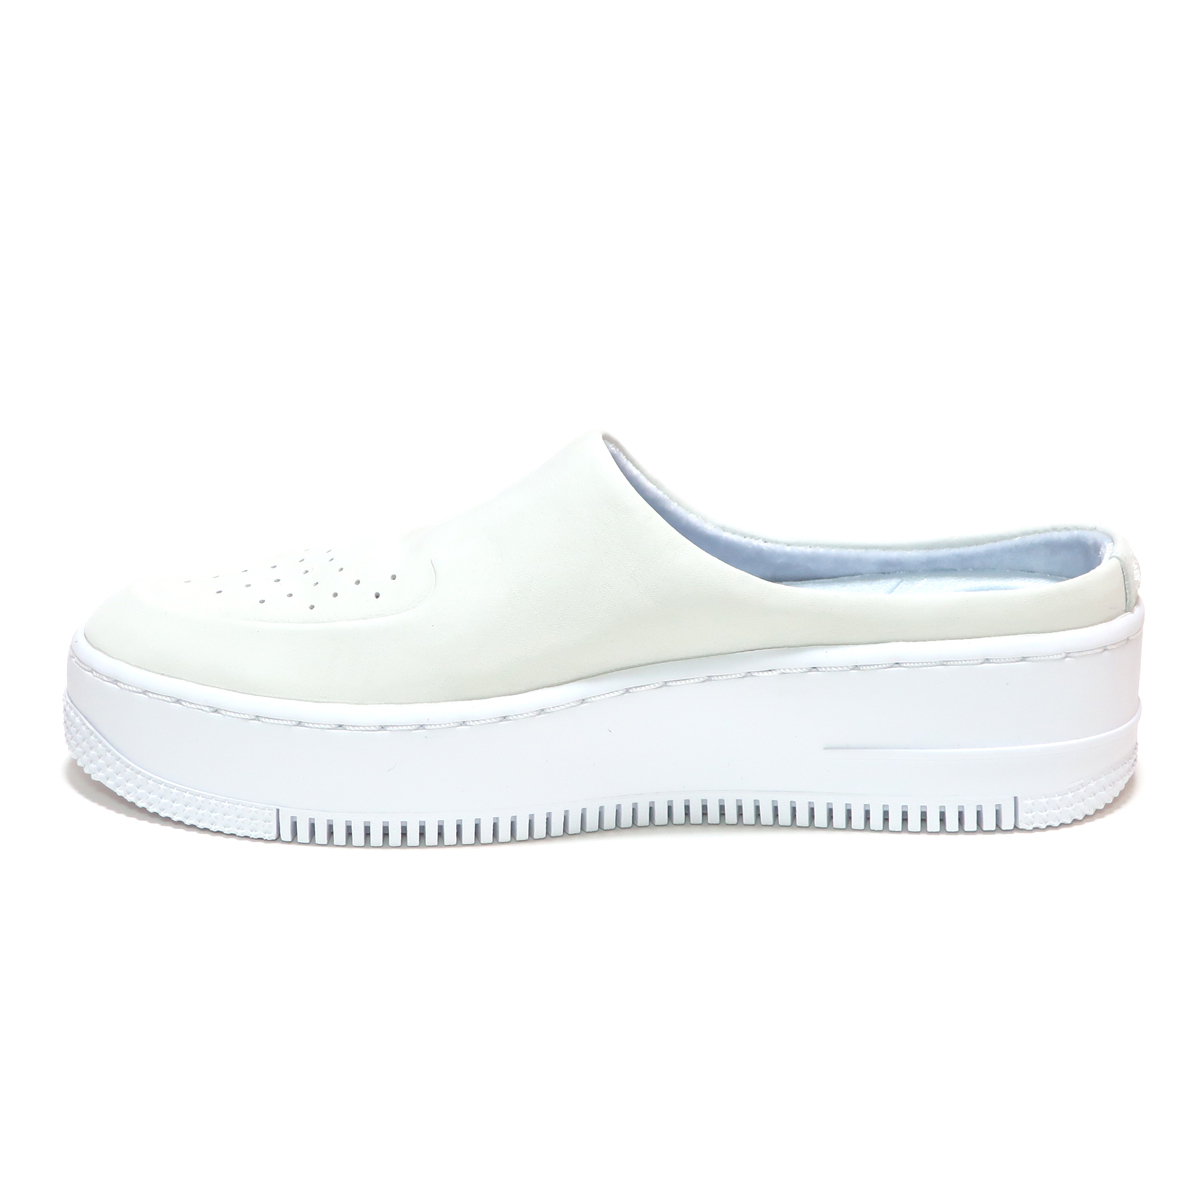 NIKE WMNS AF1 LOVER XX WMNS 24.5cm OFF WHITE/LIGHT SILVER AIR FORCE 1 ( ナイキ ウィメンズ エアフォース1 ラヴァ― オフホワイト )_画像6